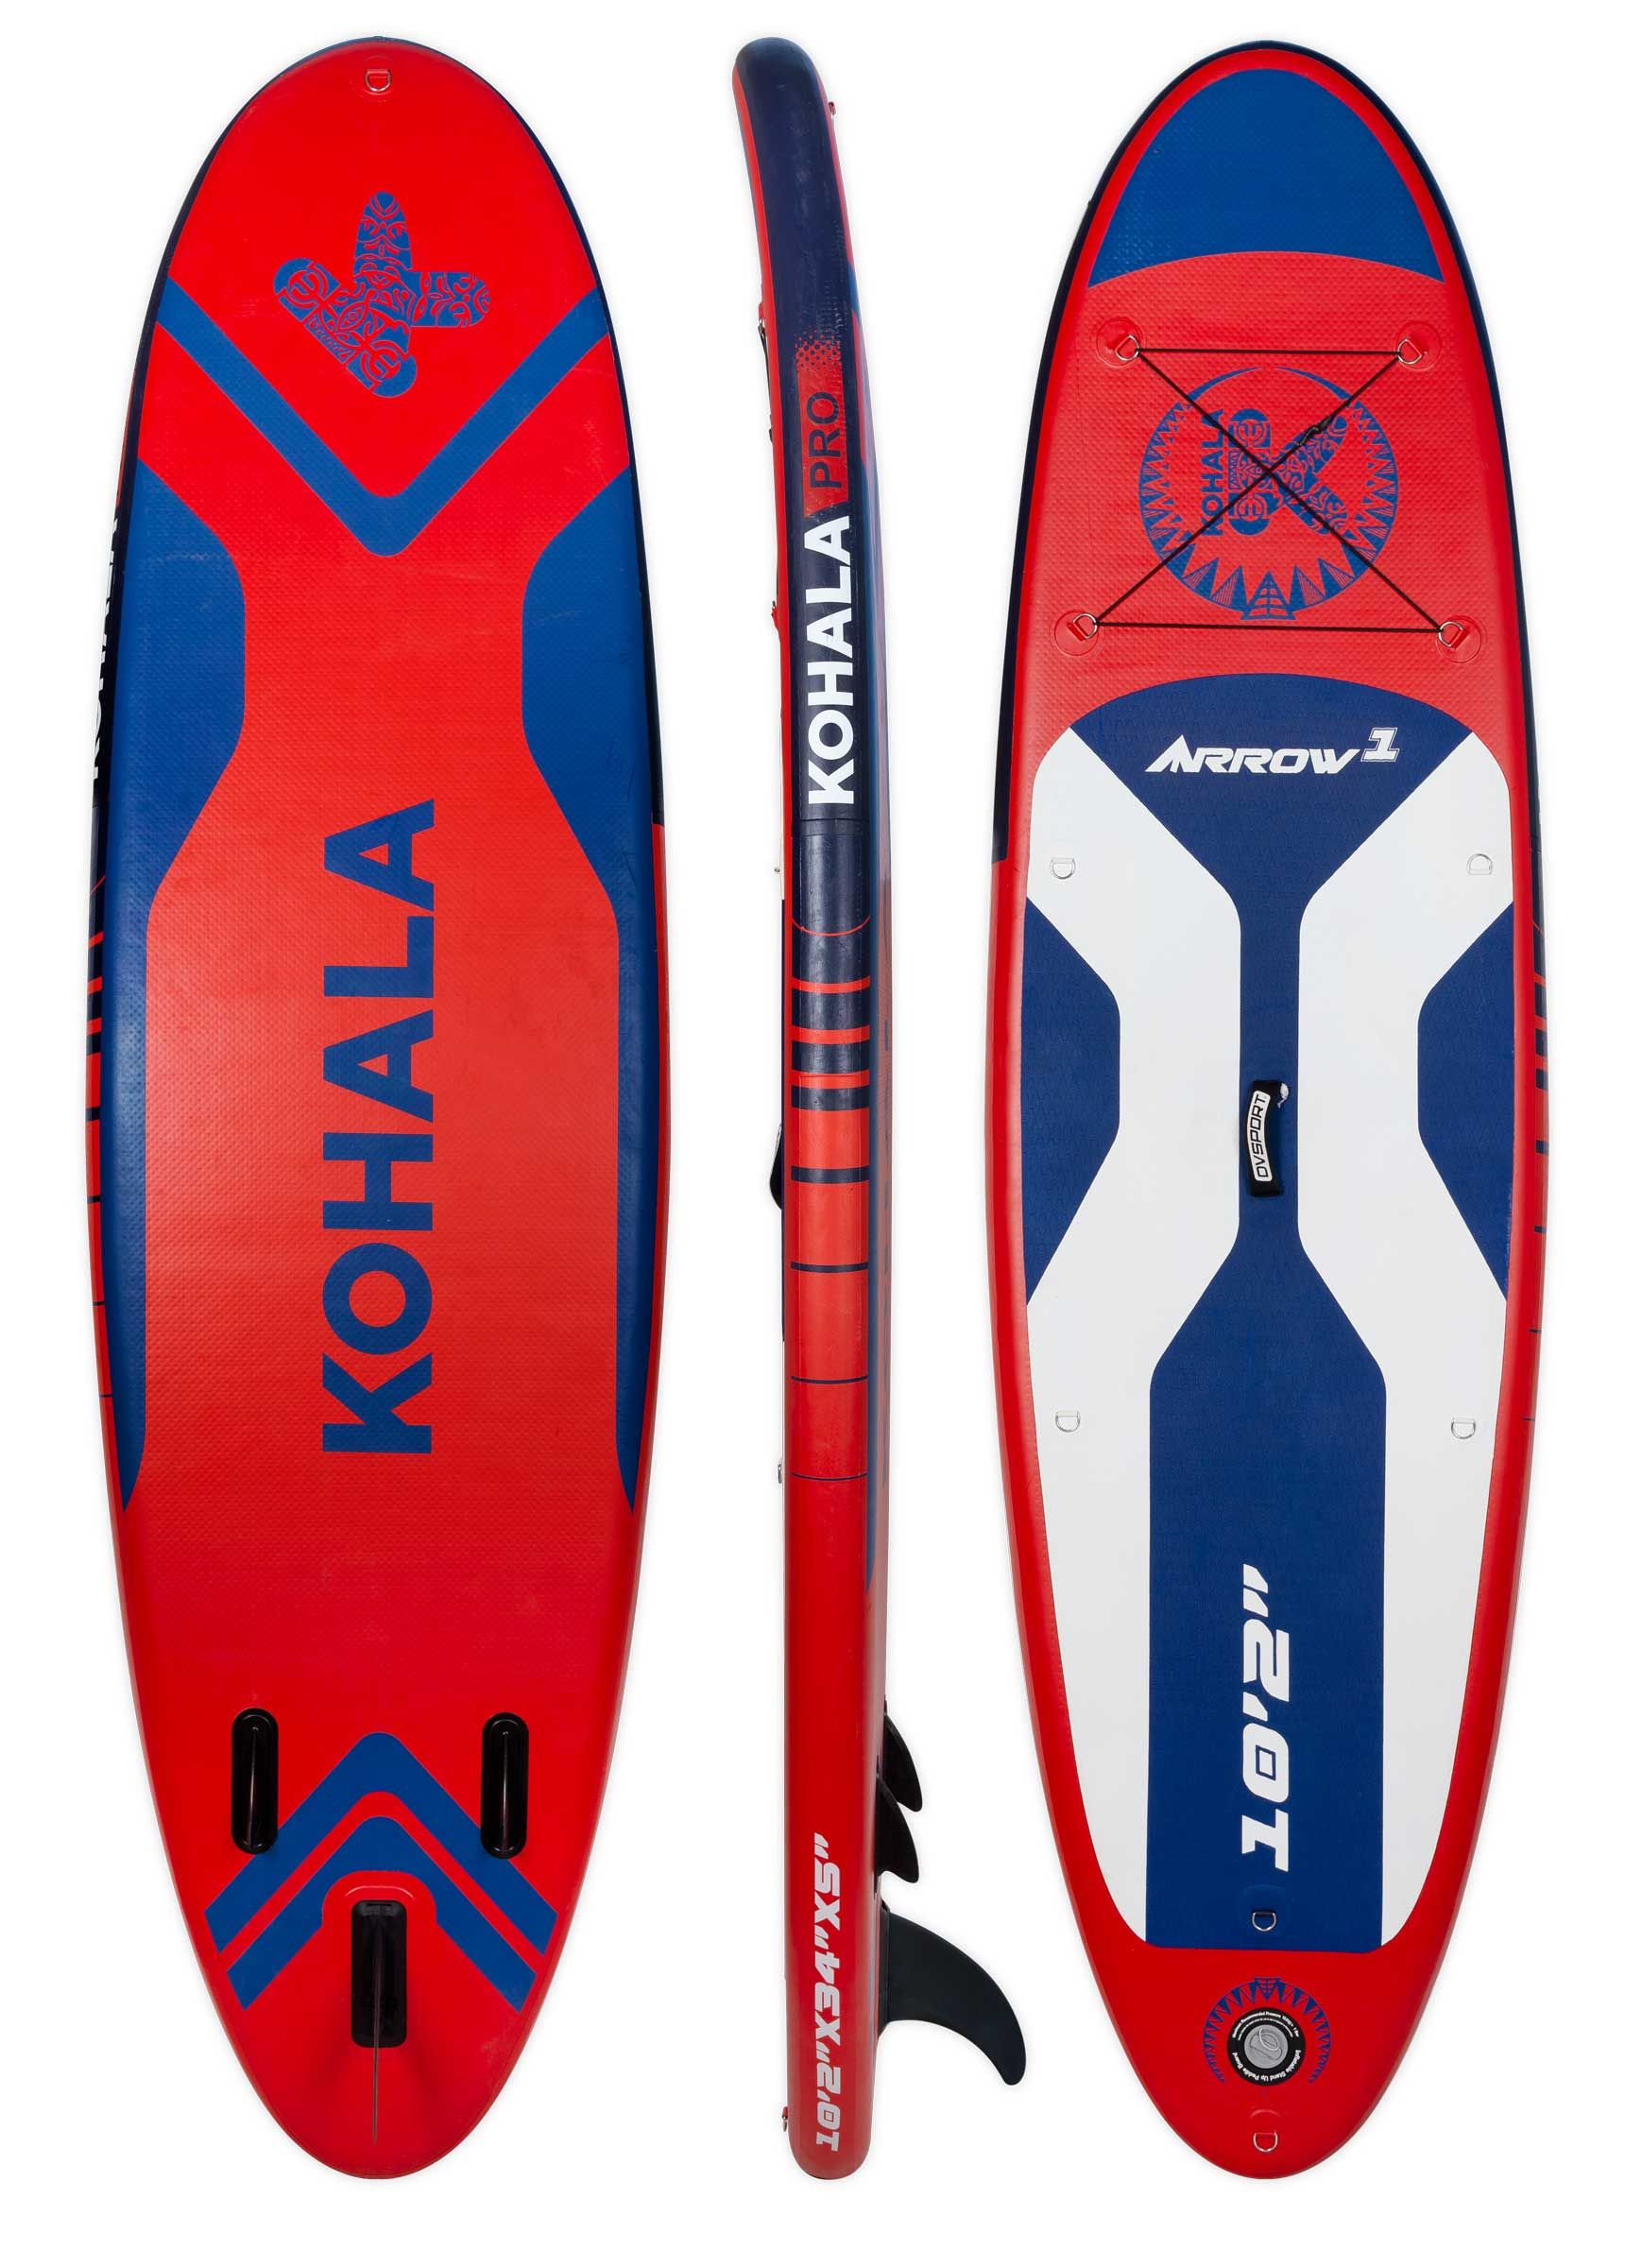 Stand Up Paddle Gonflable kohala 10'2 Arrow School